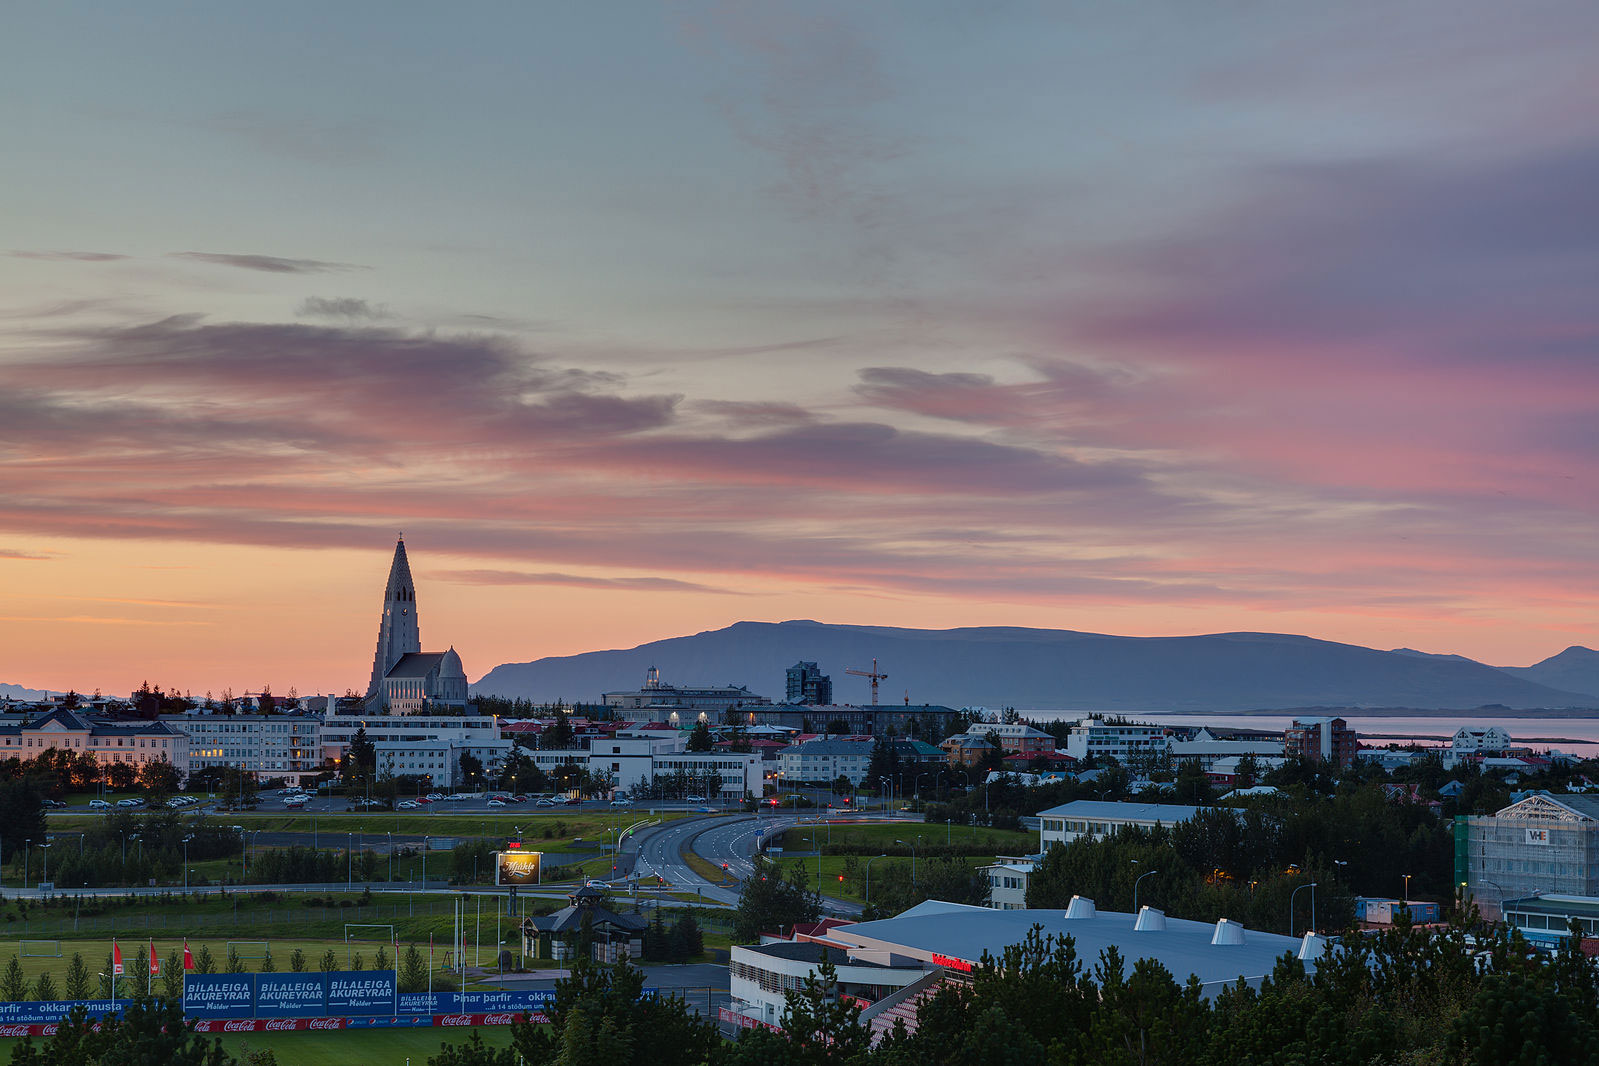 View of Reykjavik, the capital city of Iceland